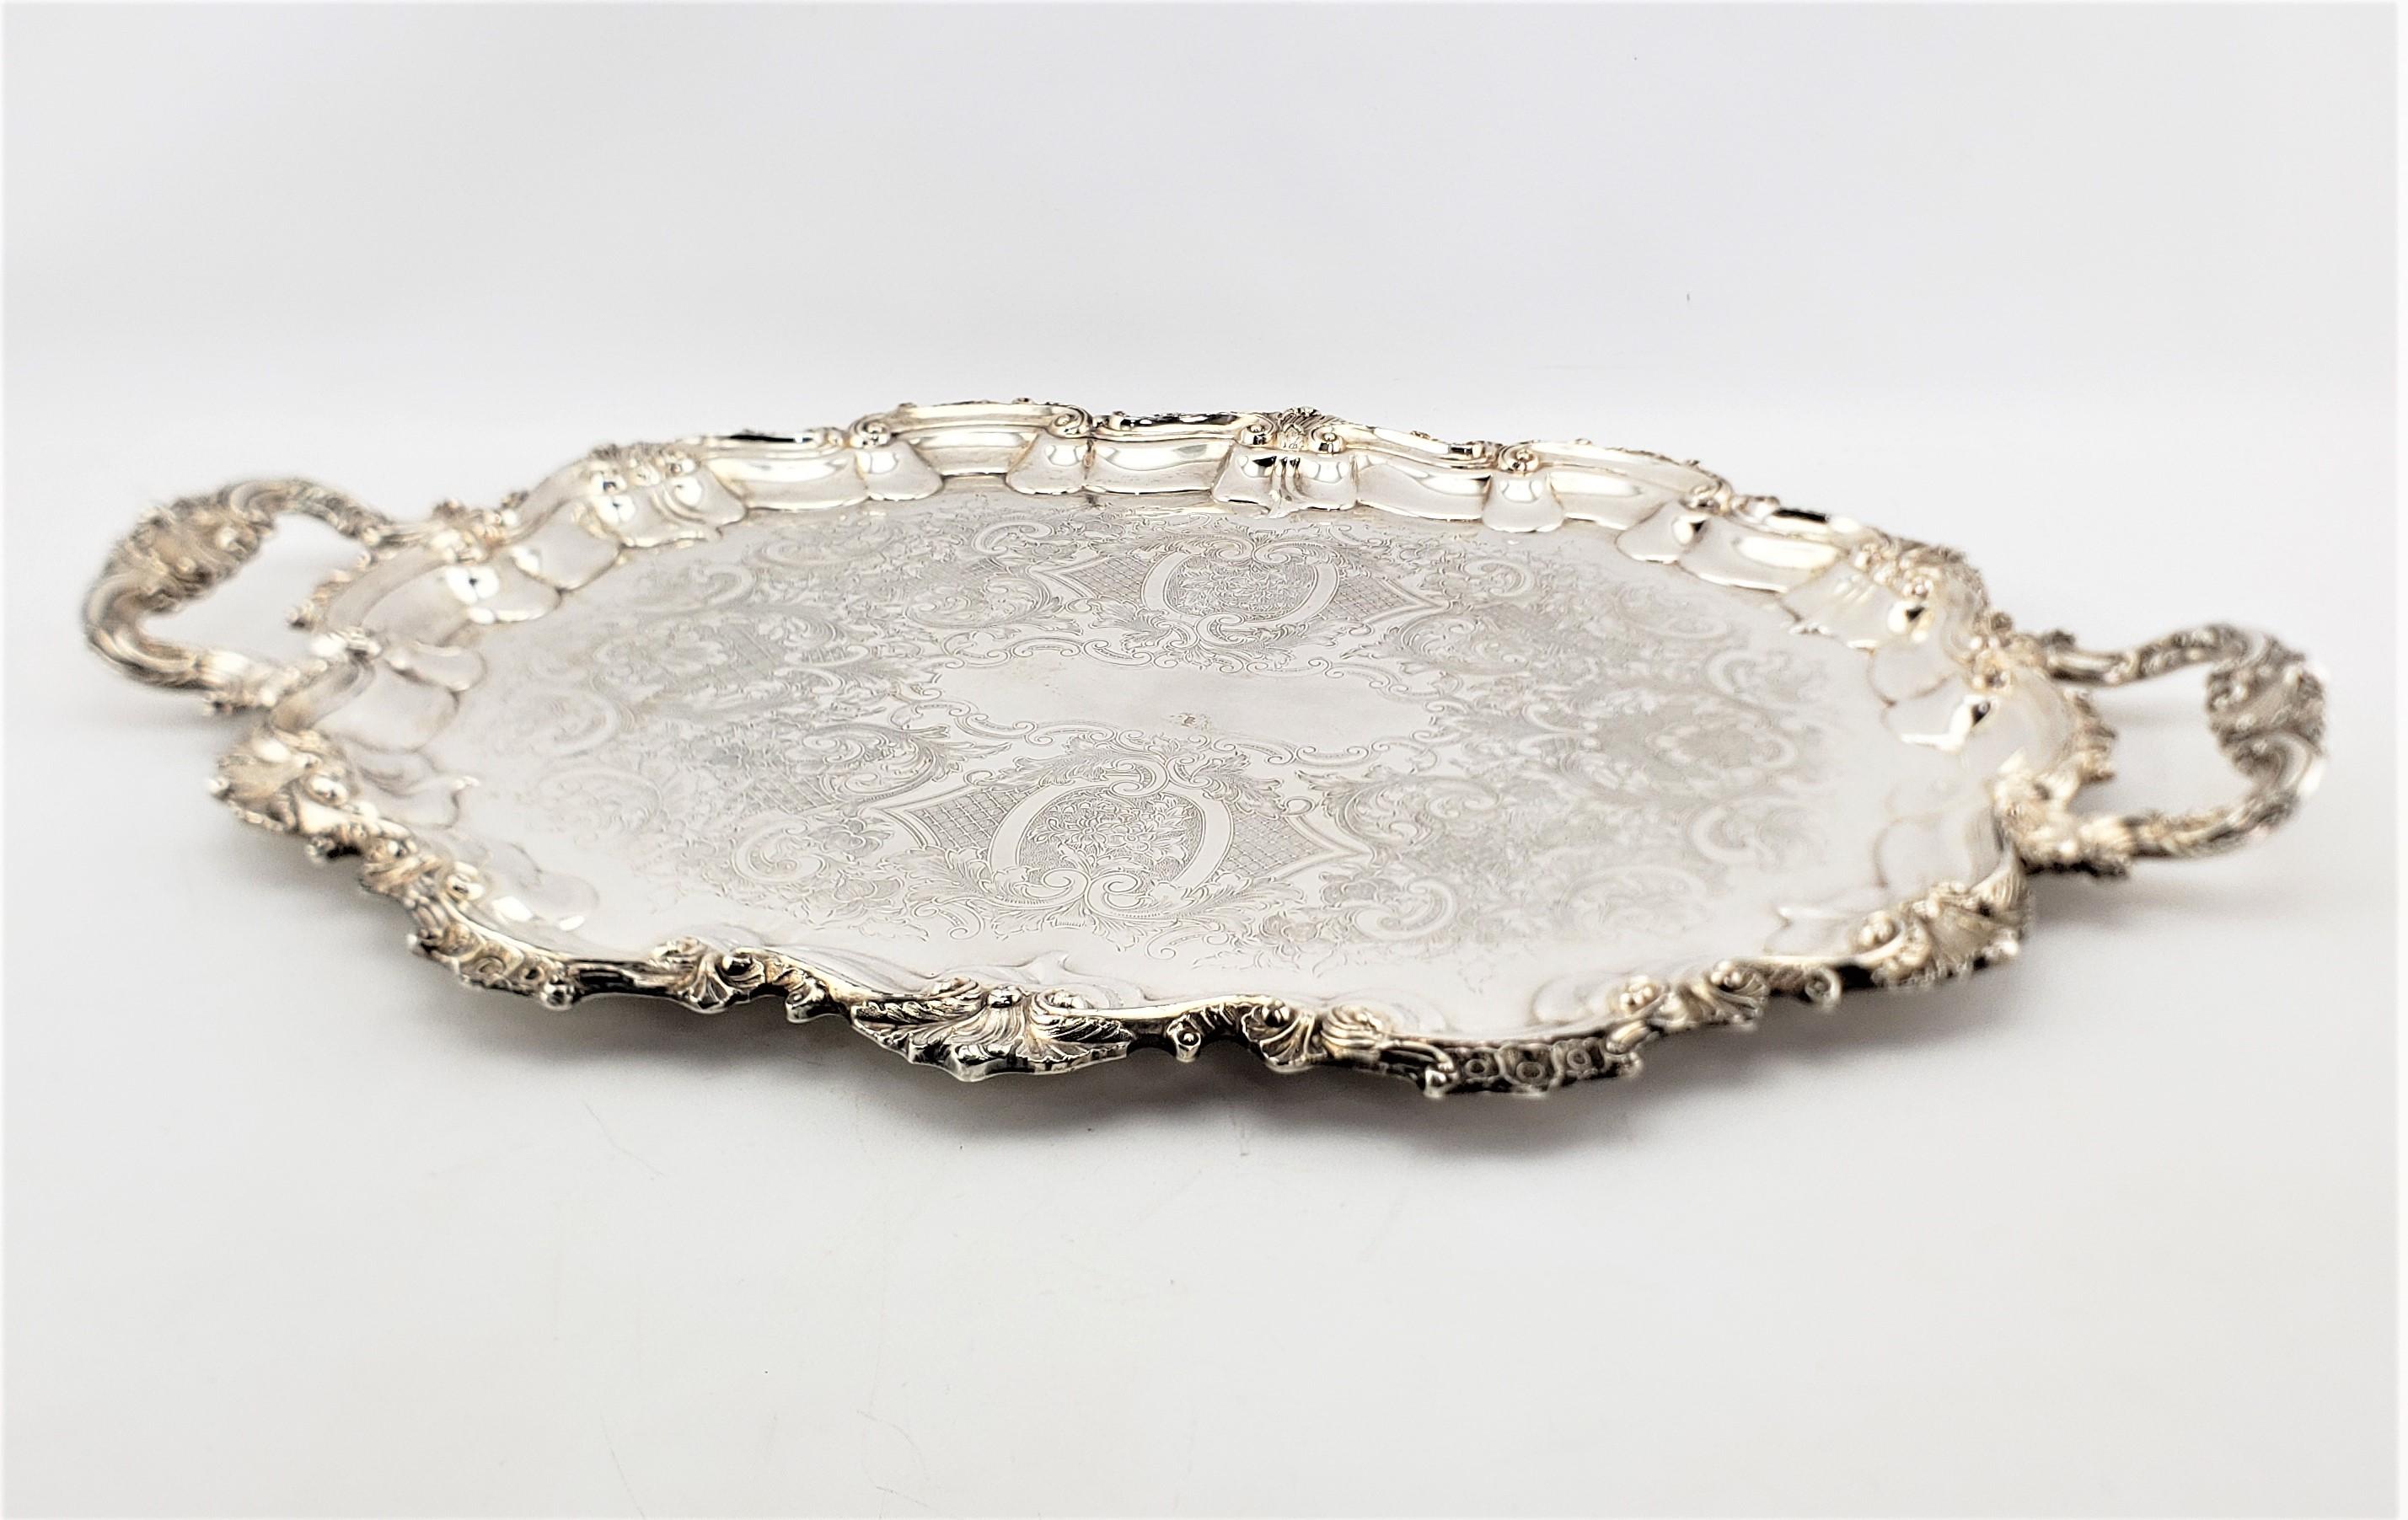 antique silver serving tray value